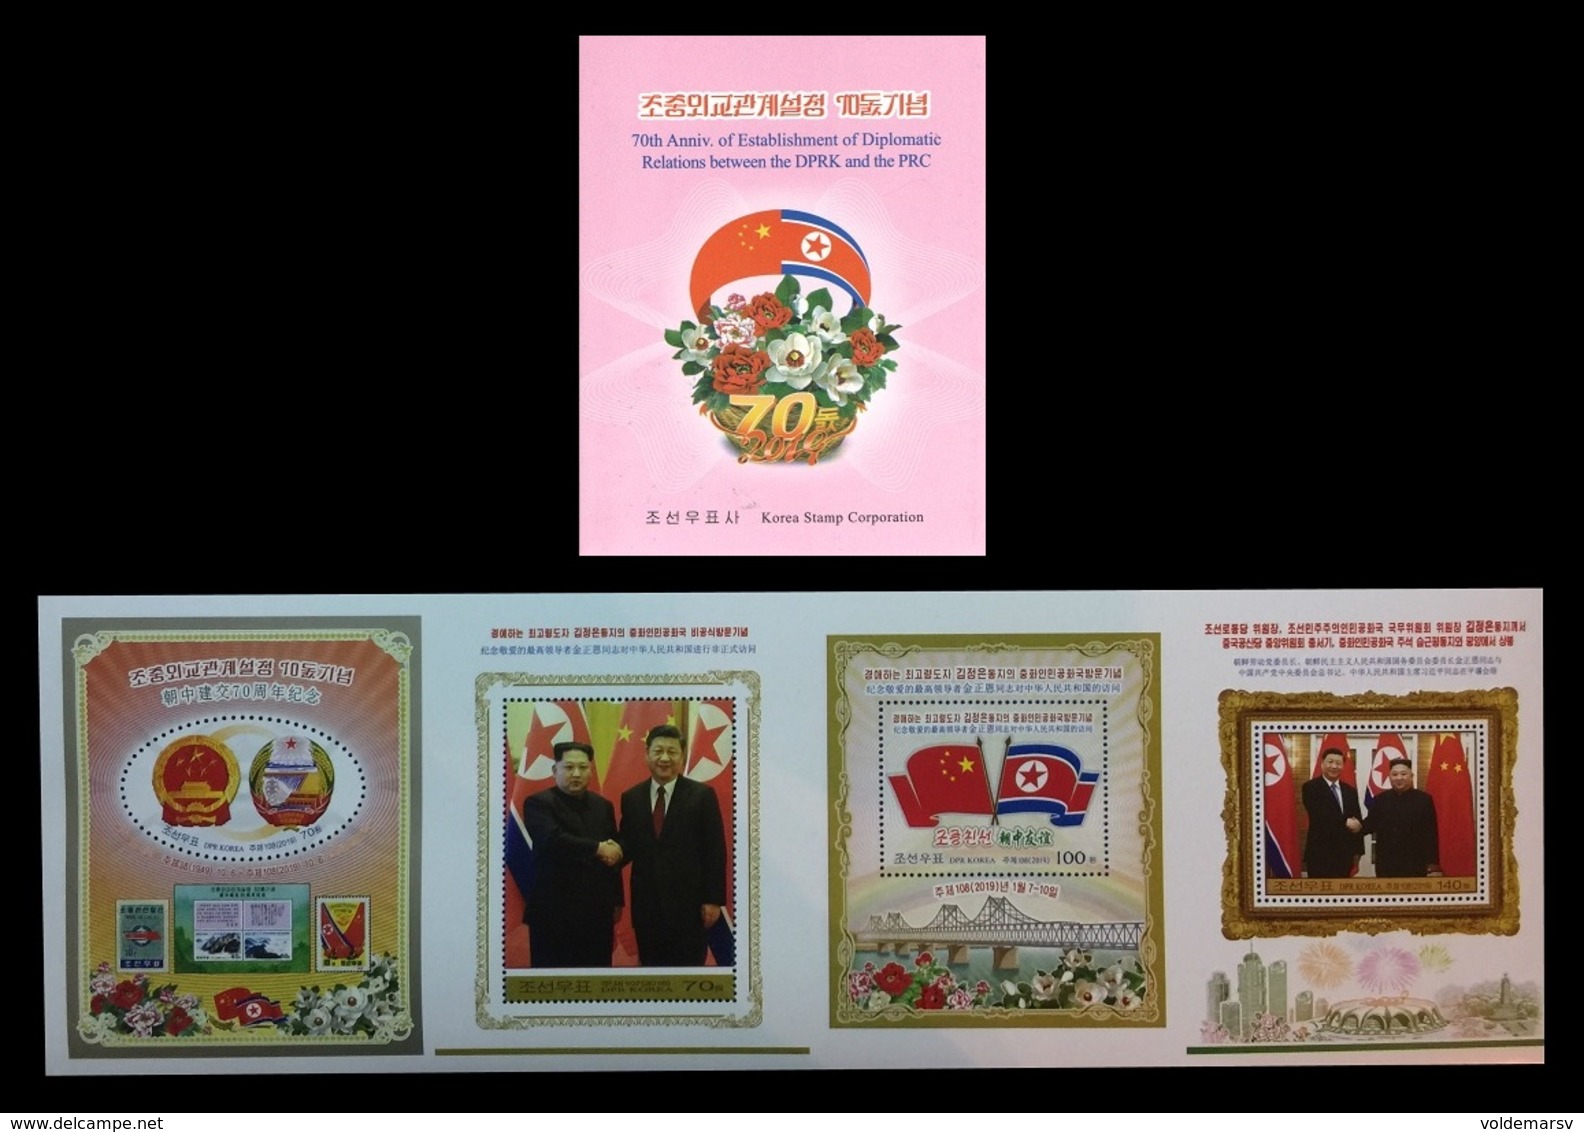 North Korea 2019 Mih. 6630 Diplomatic Relations With China. State Arms. Kim Jong Un. Xi Jinping (booklet) MNH ** - Corea Del Norte